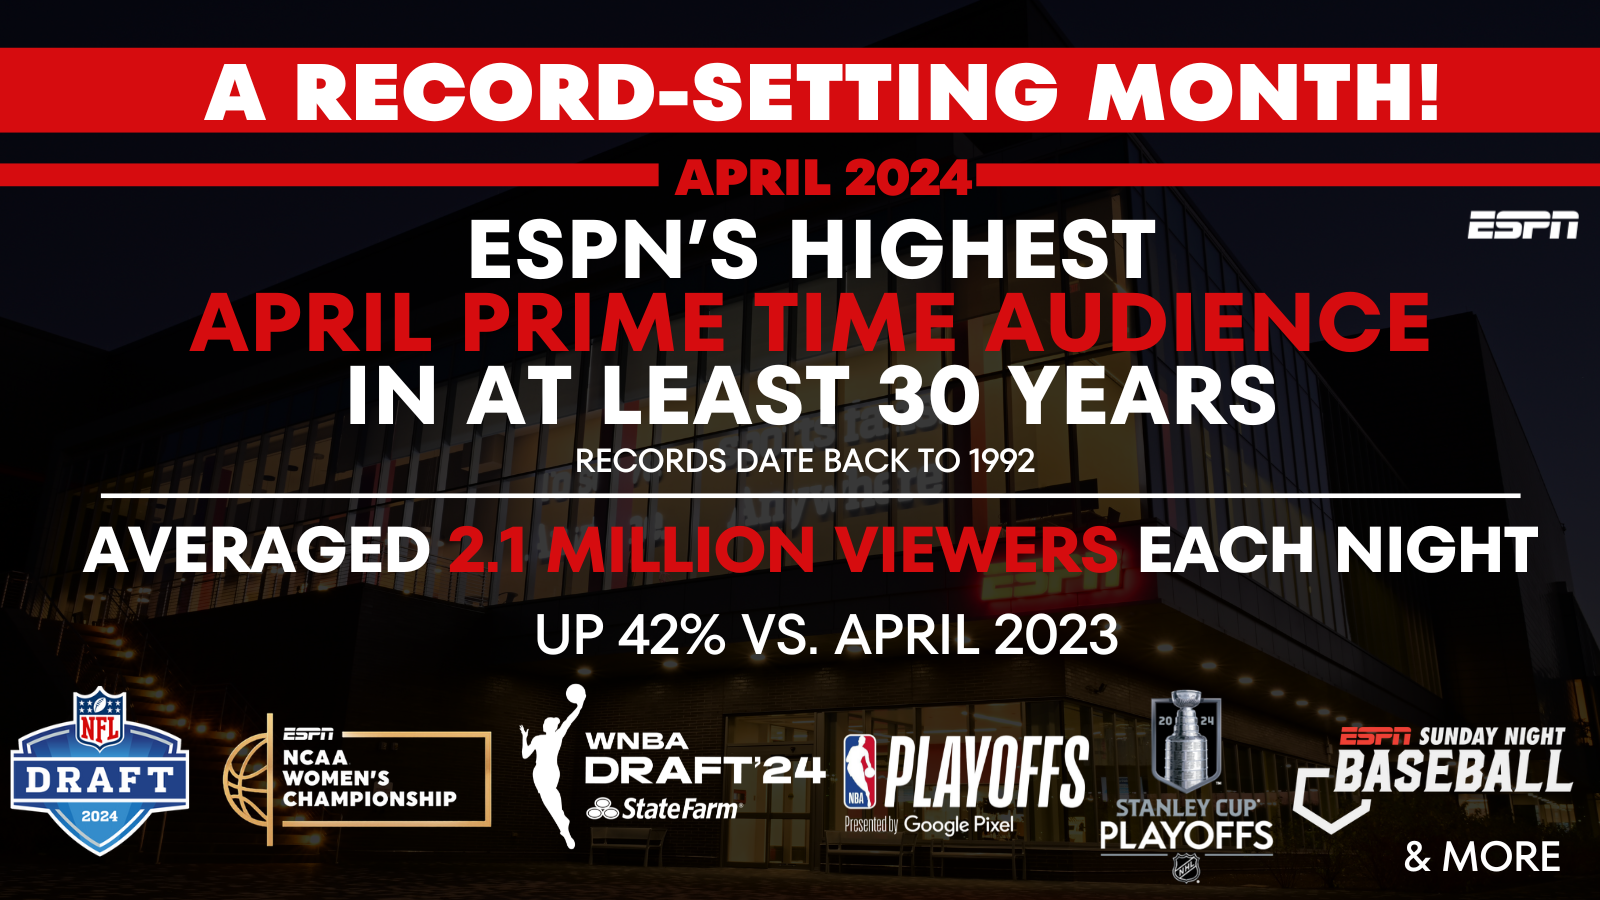 ESPN Earns Its Highest April Prime Time Audience on Record, Averaging 2.1M Viewers Each Night